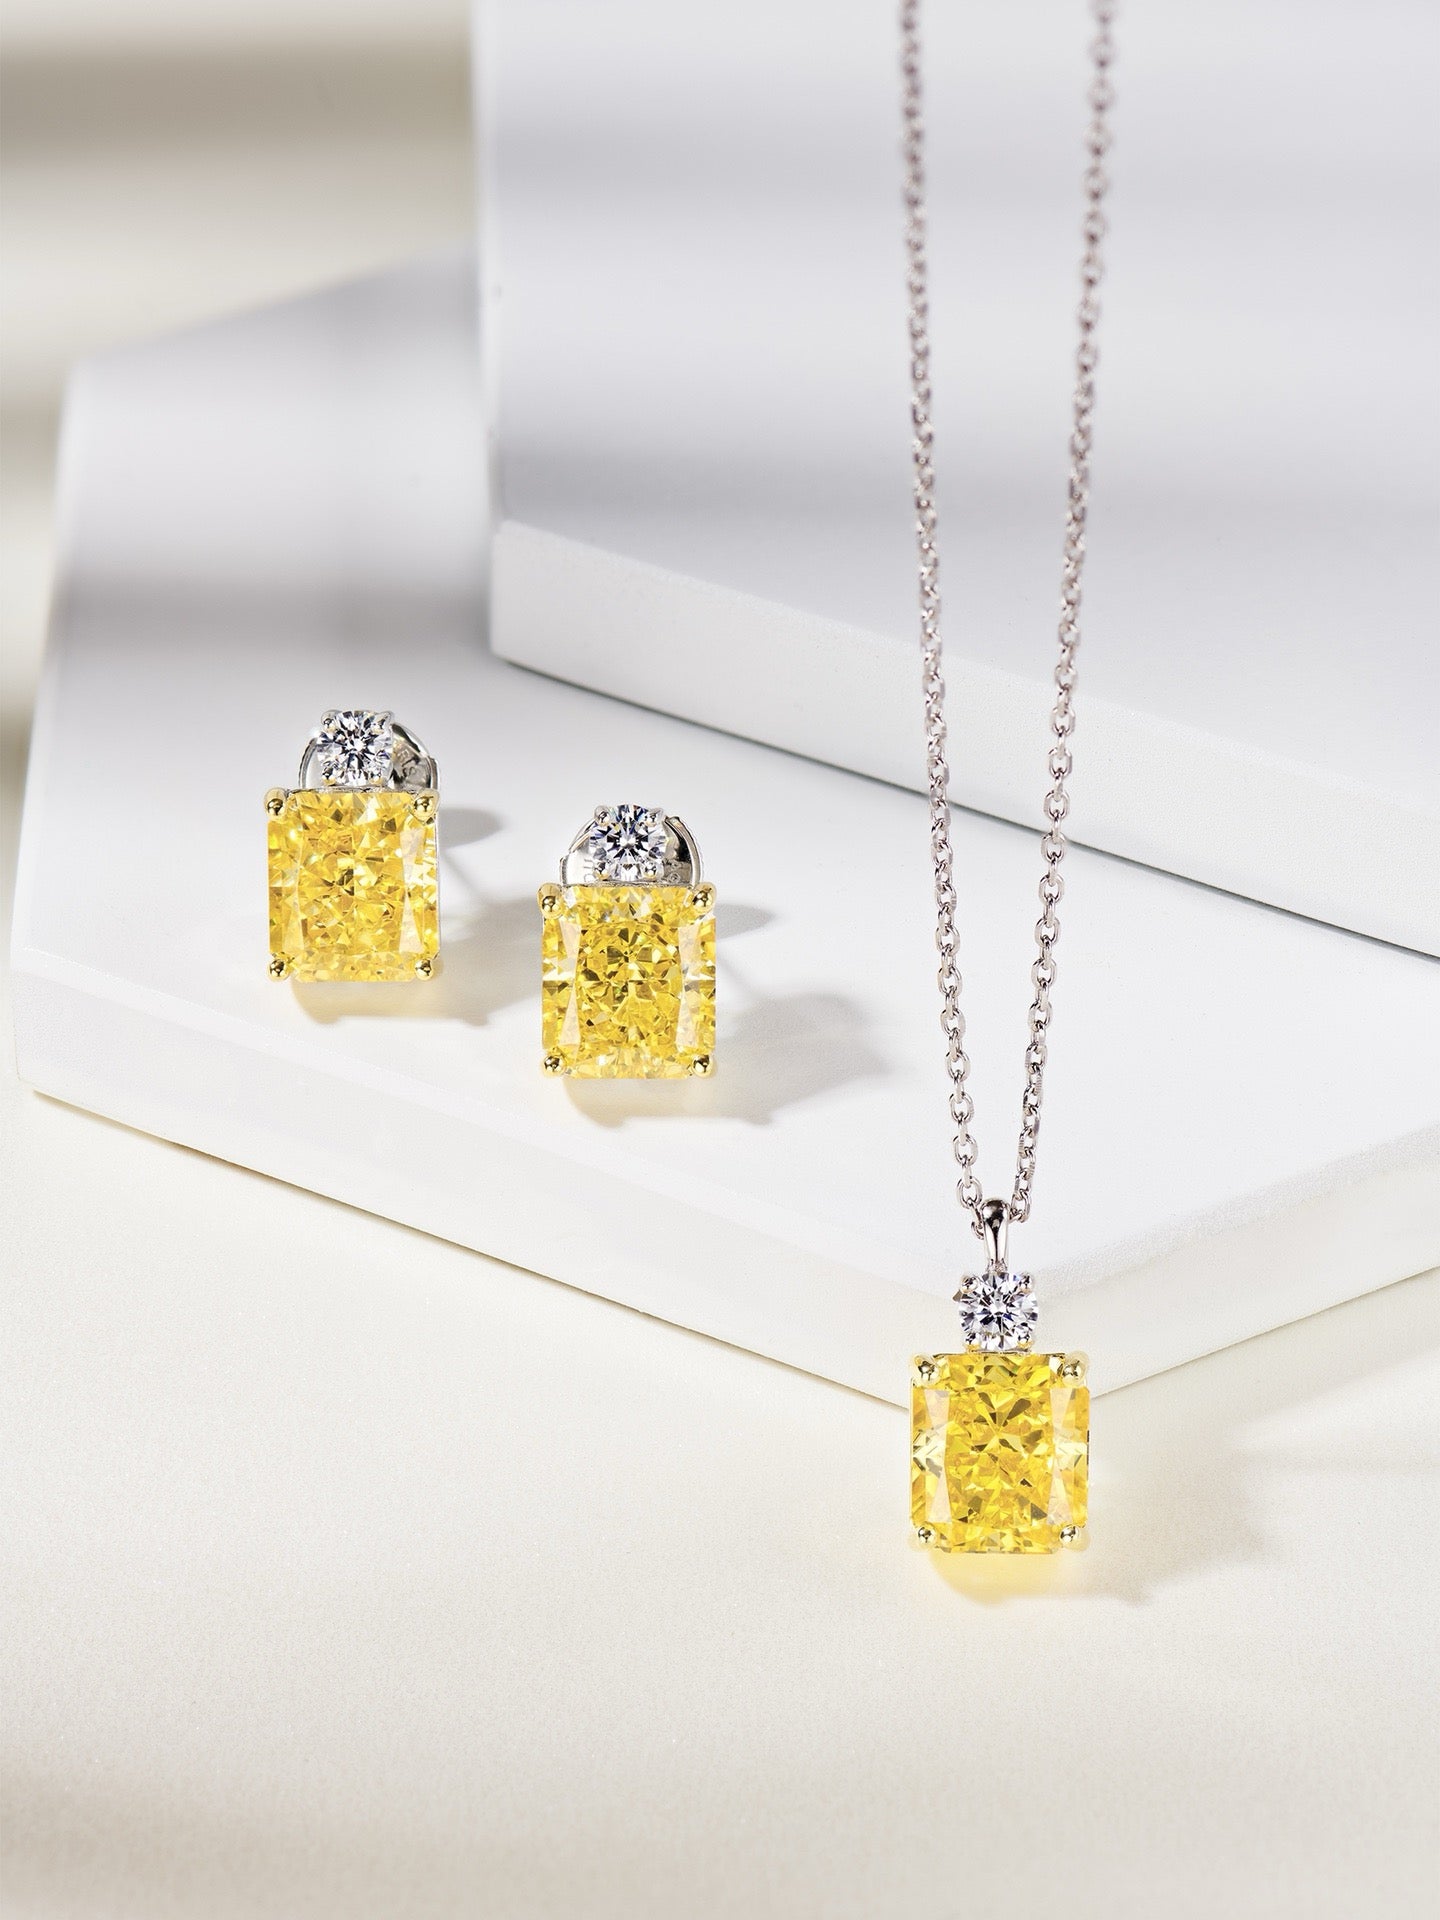 Dazzling Yellow Diamond Necklace and Earrings Set